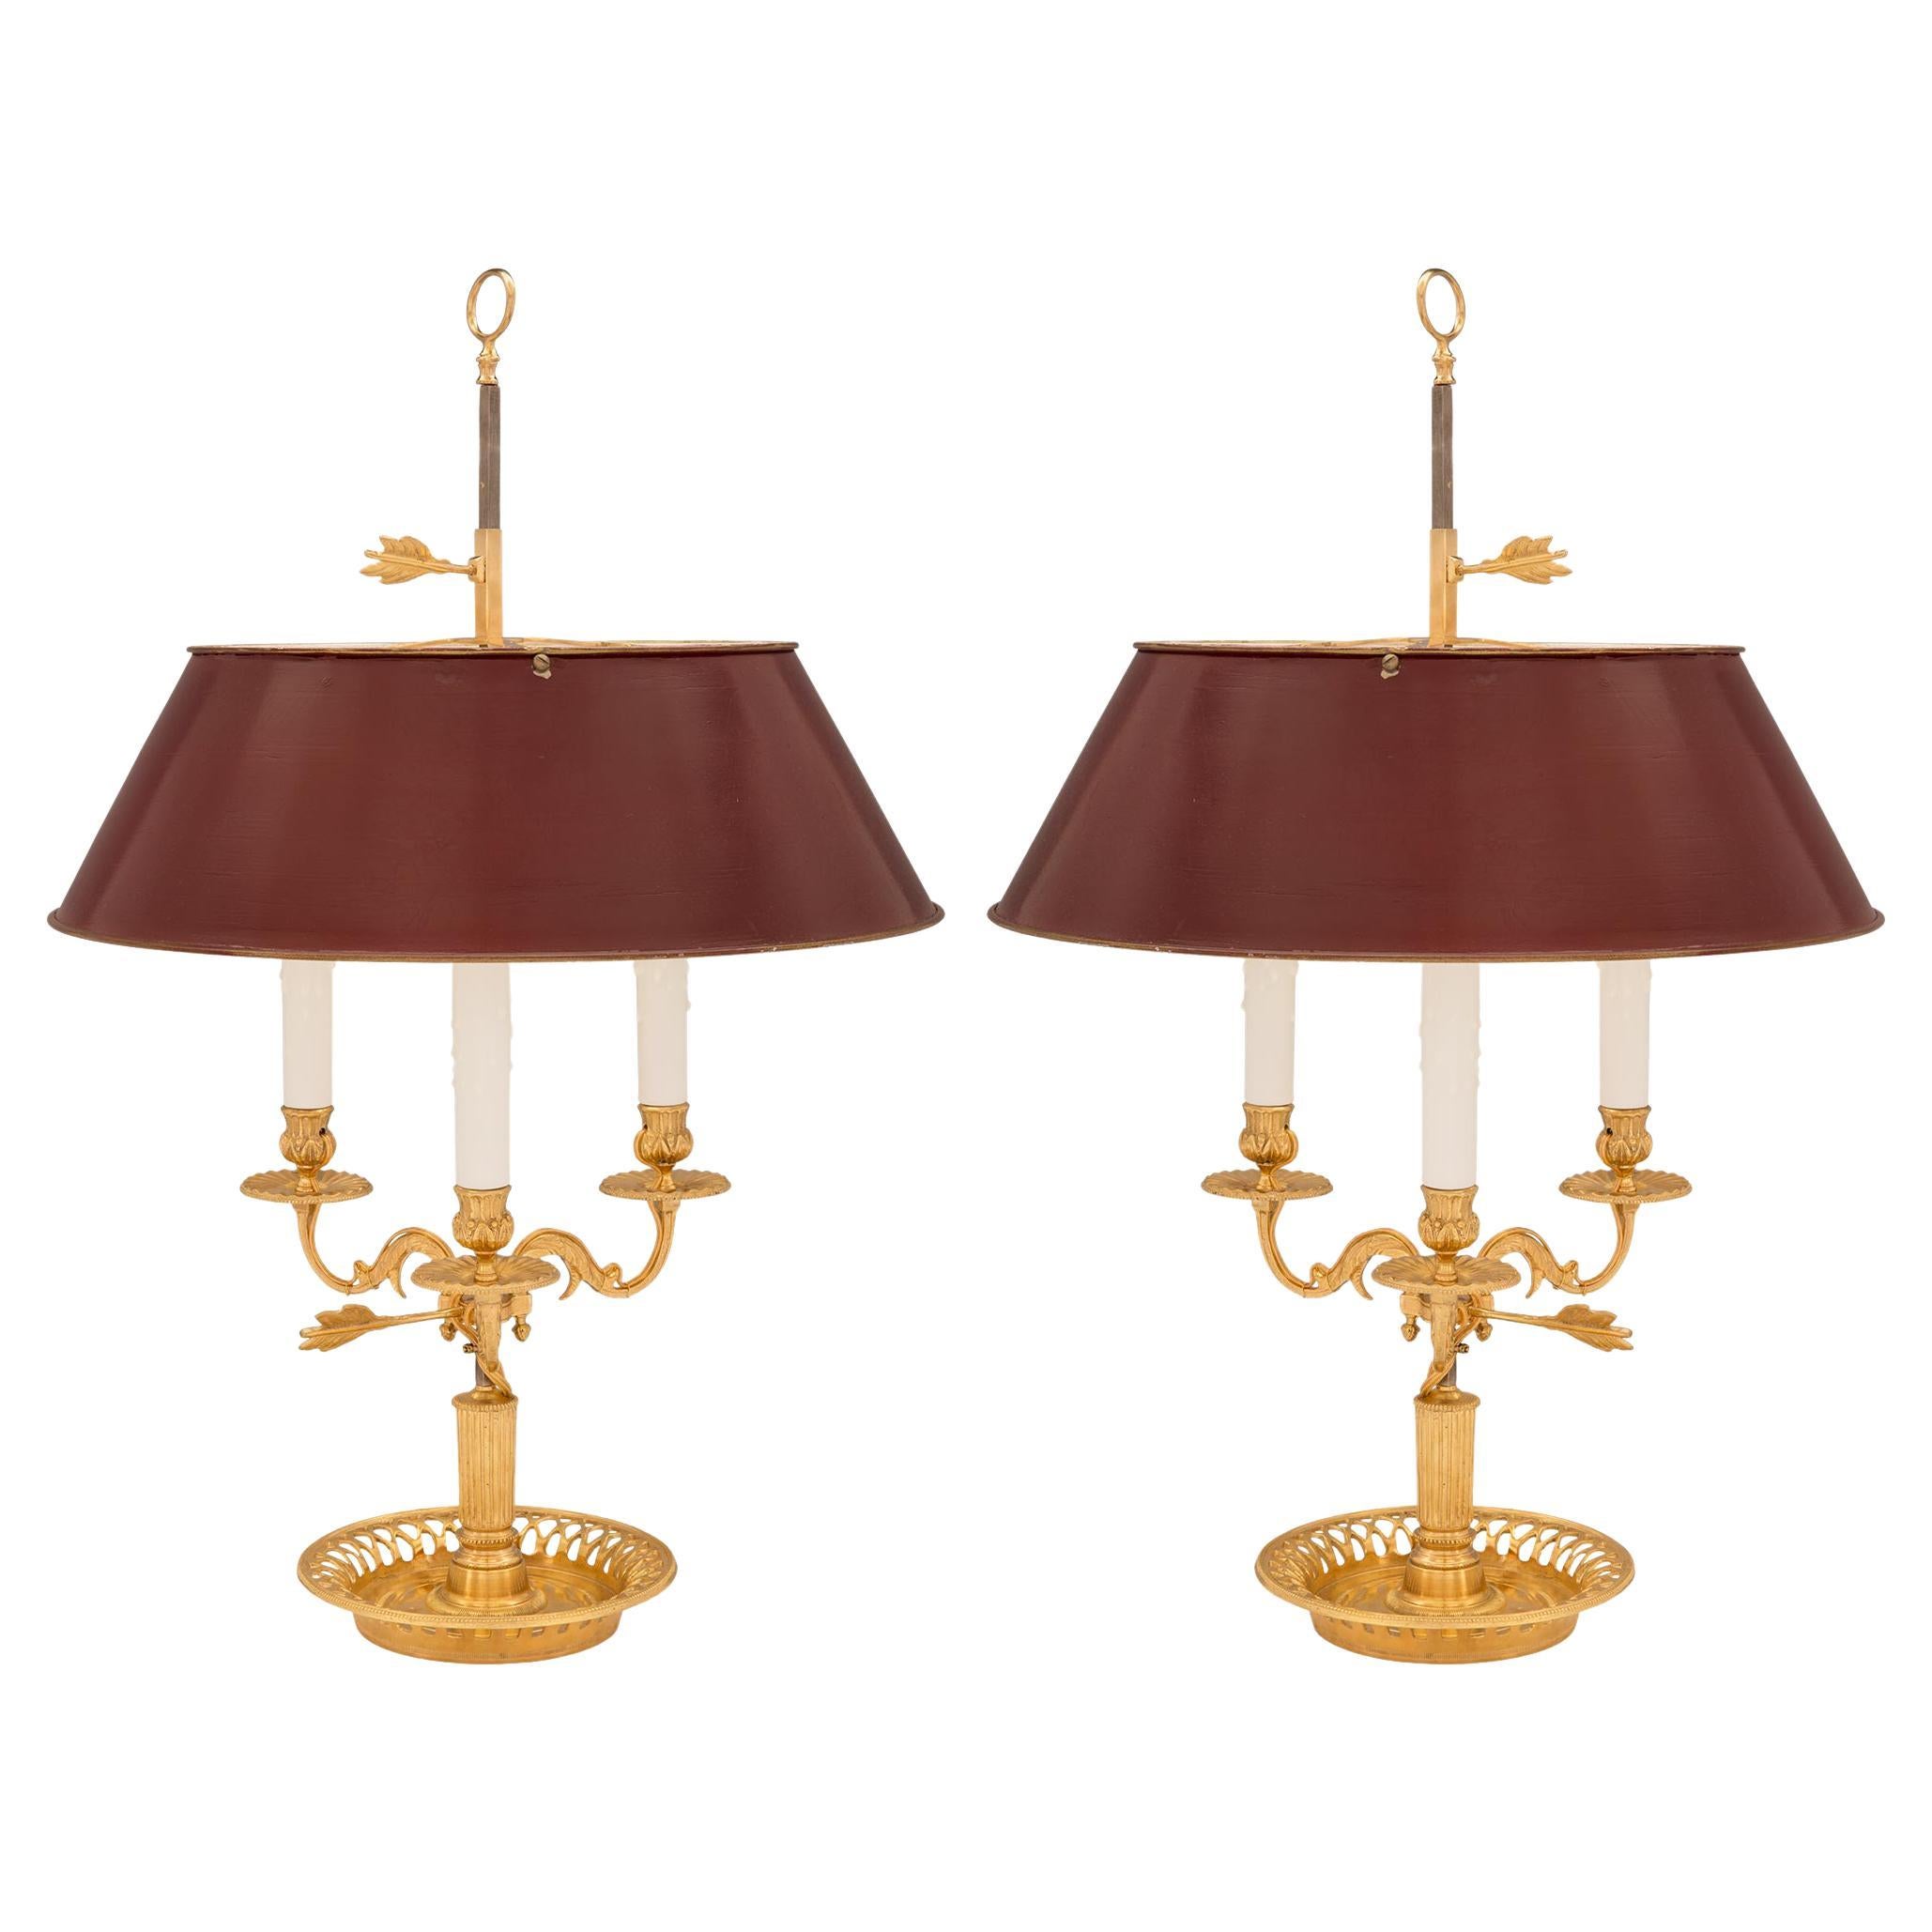 Pair of French 19th Century Louis XVI Style Ormolu and Tole Bouilotte Lamps For Sale